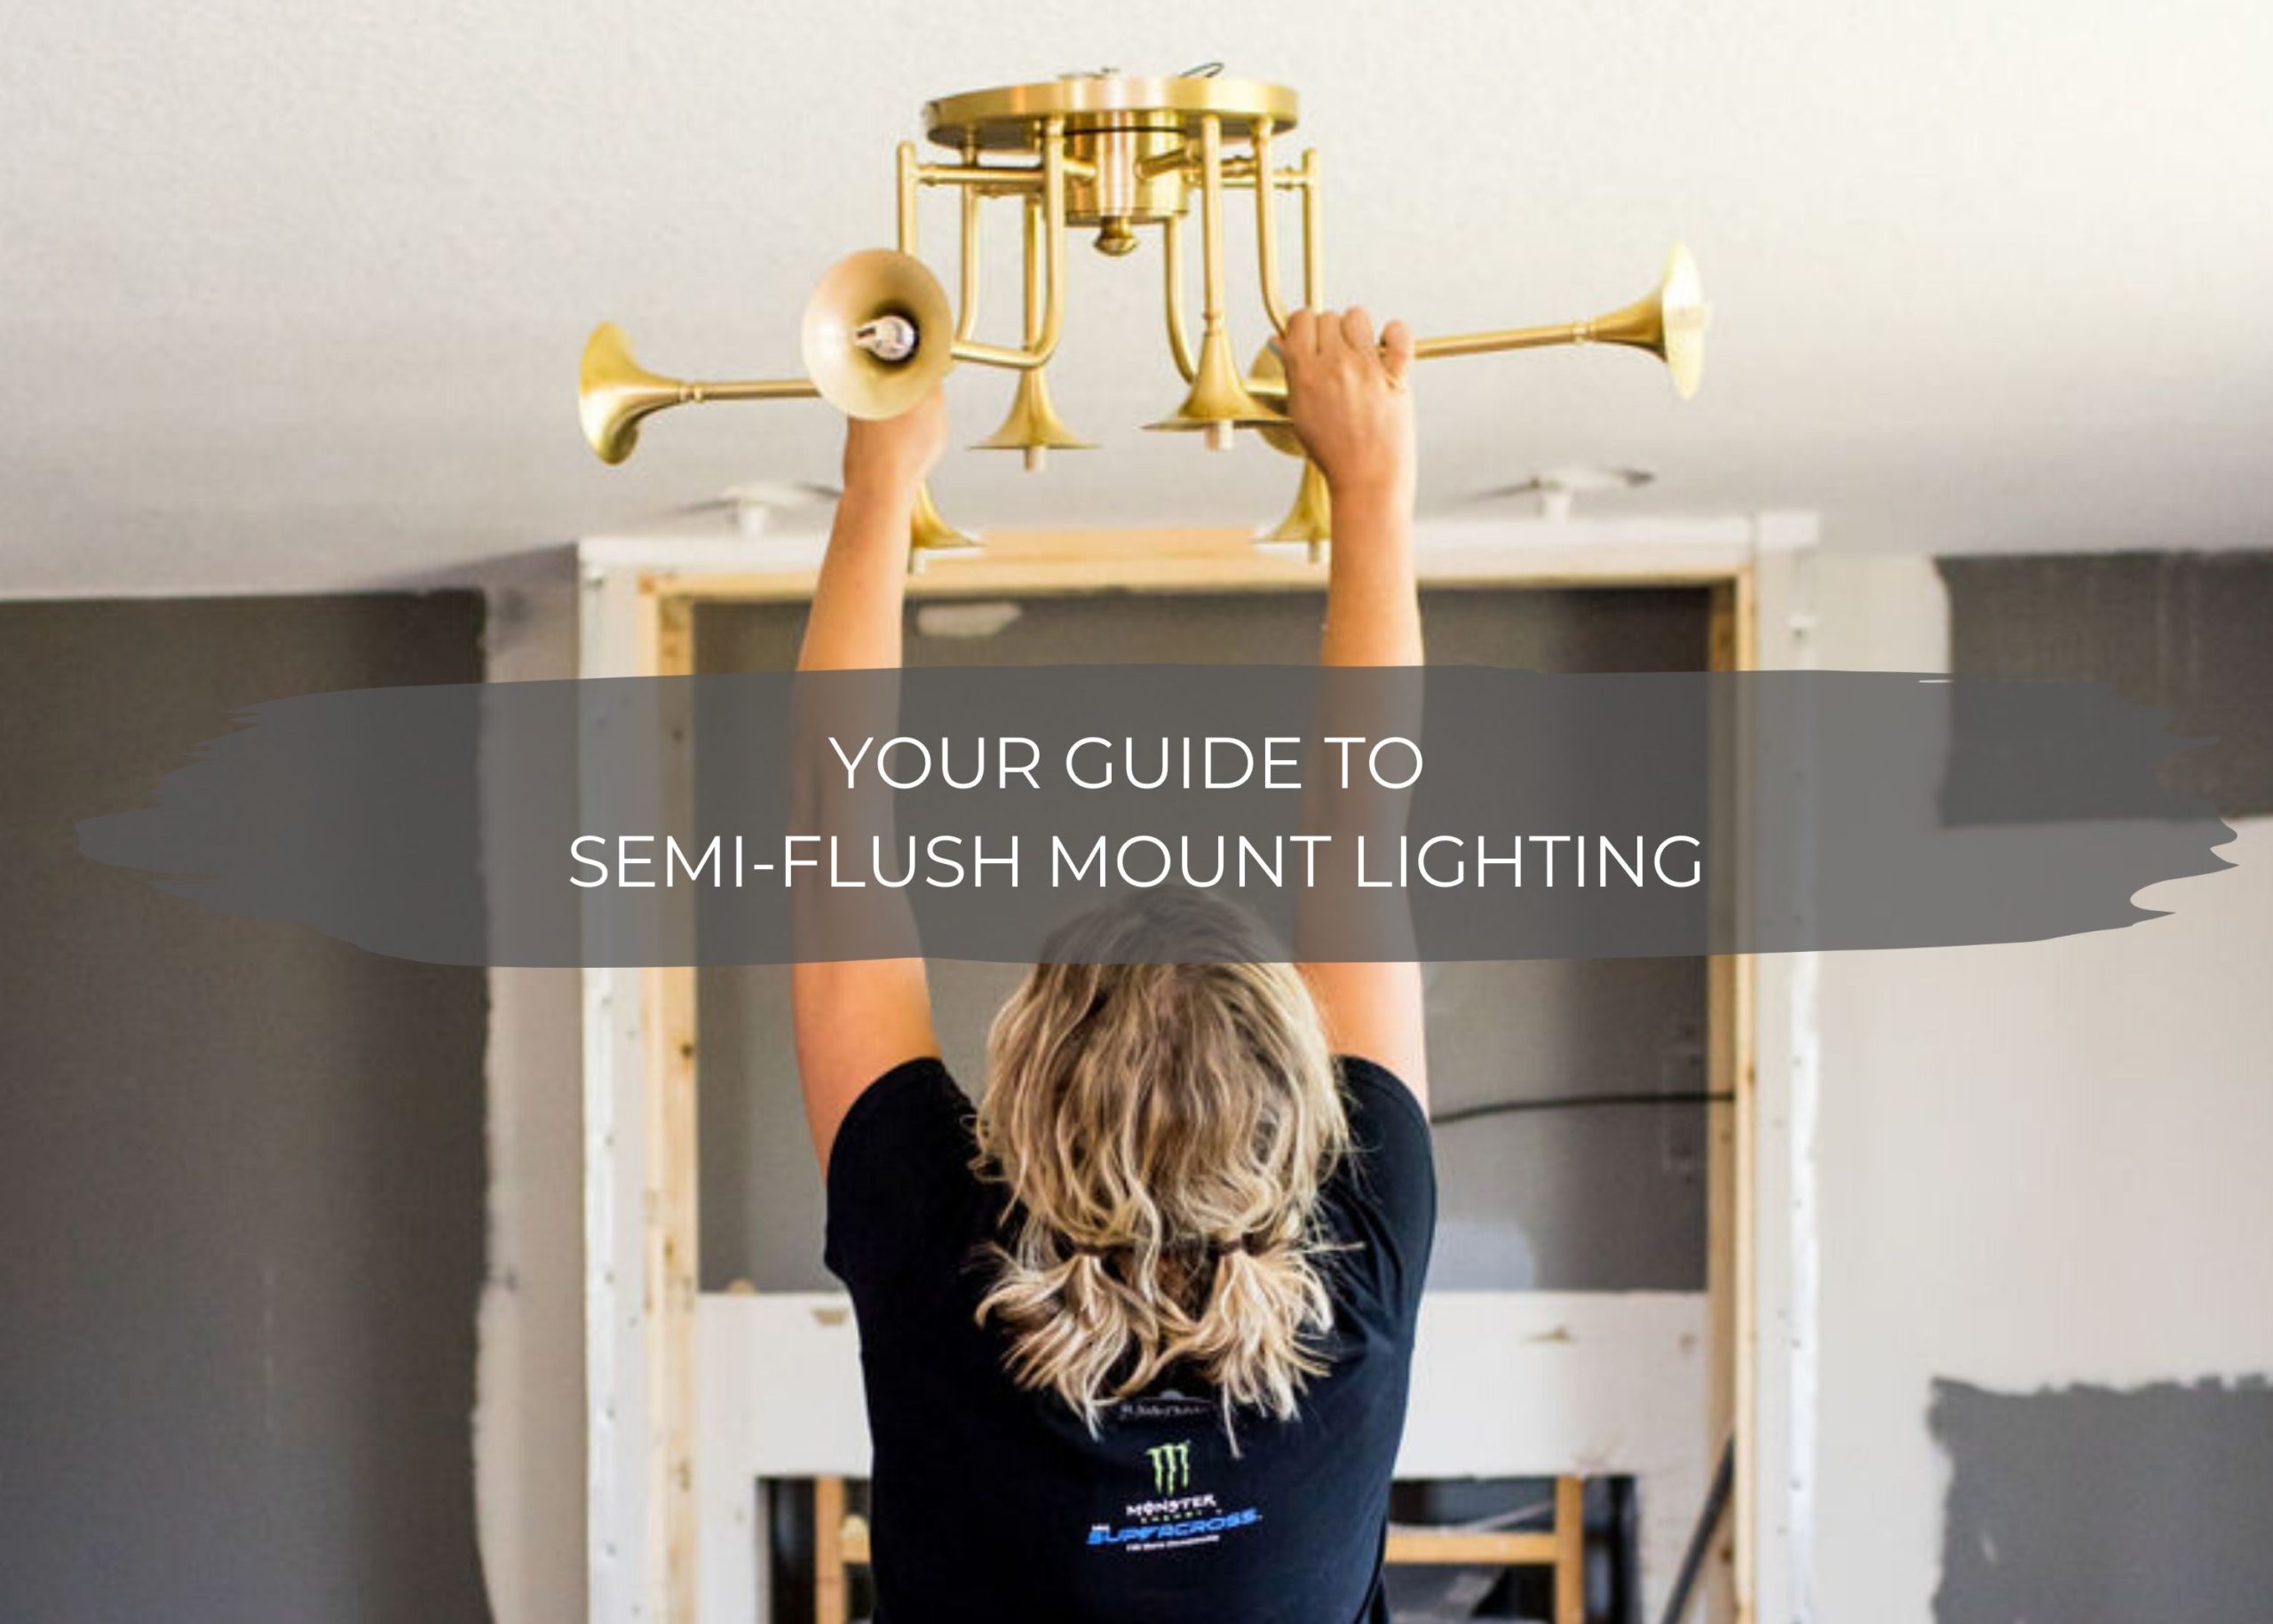 Your Guide to Semi- Flush Mount Lighting